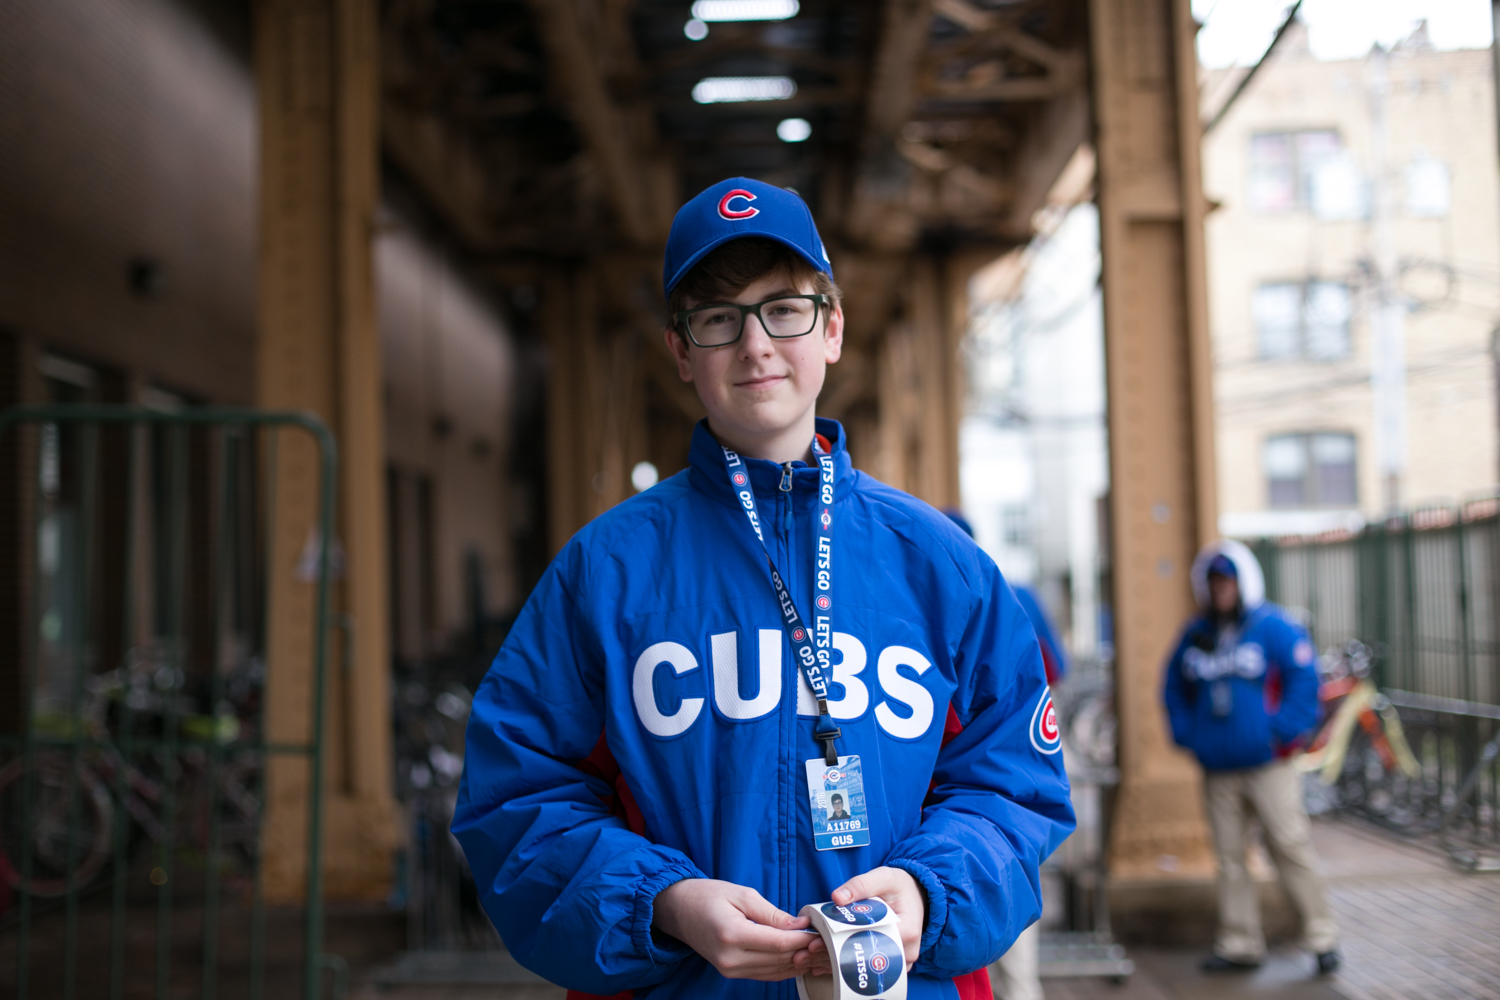  Gus hands out free stickers during his downtime at the bike check outside Wrigley Field. He's happy that his first job is working for his favorite team. 6/24&nbsp; 